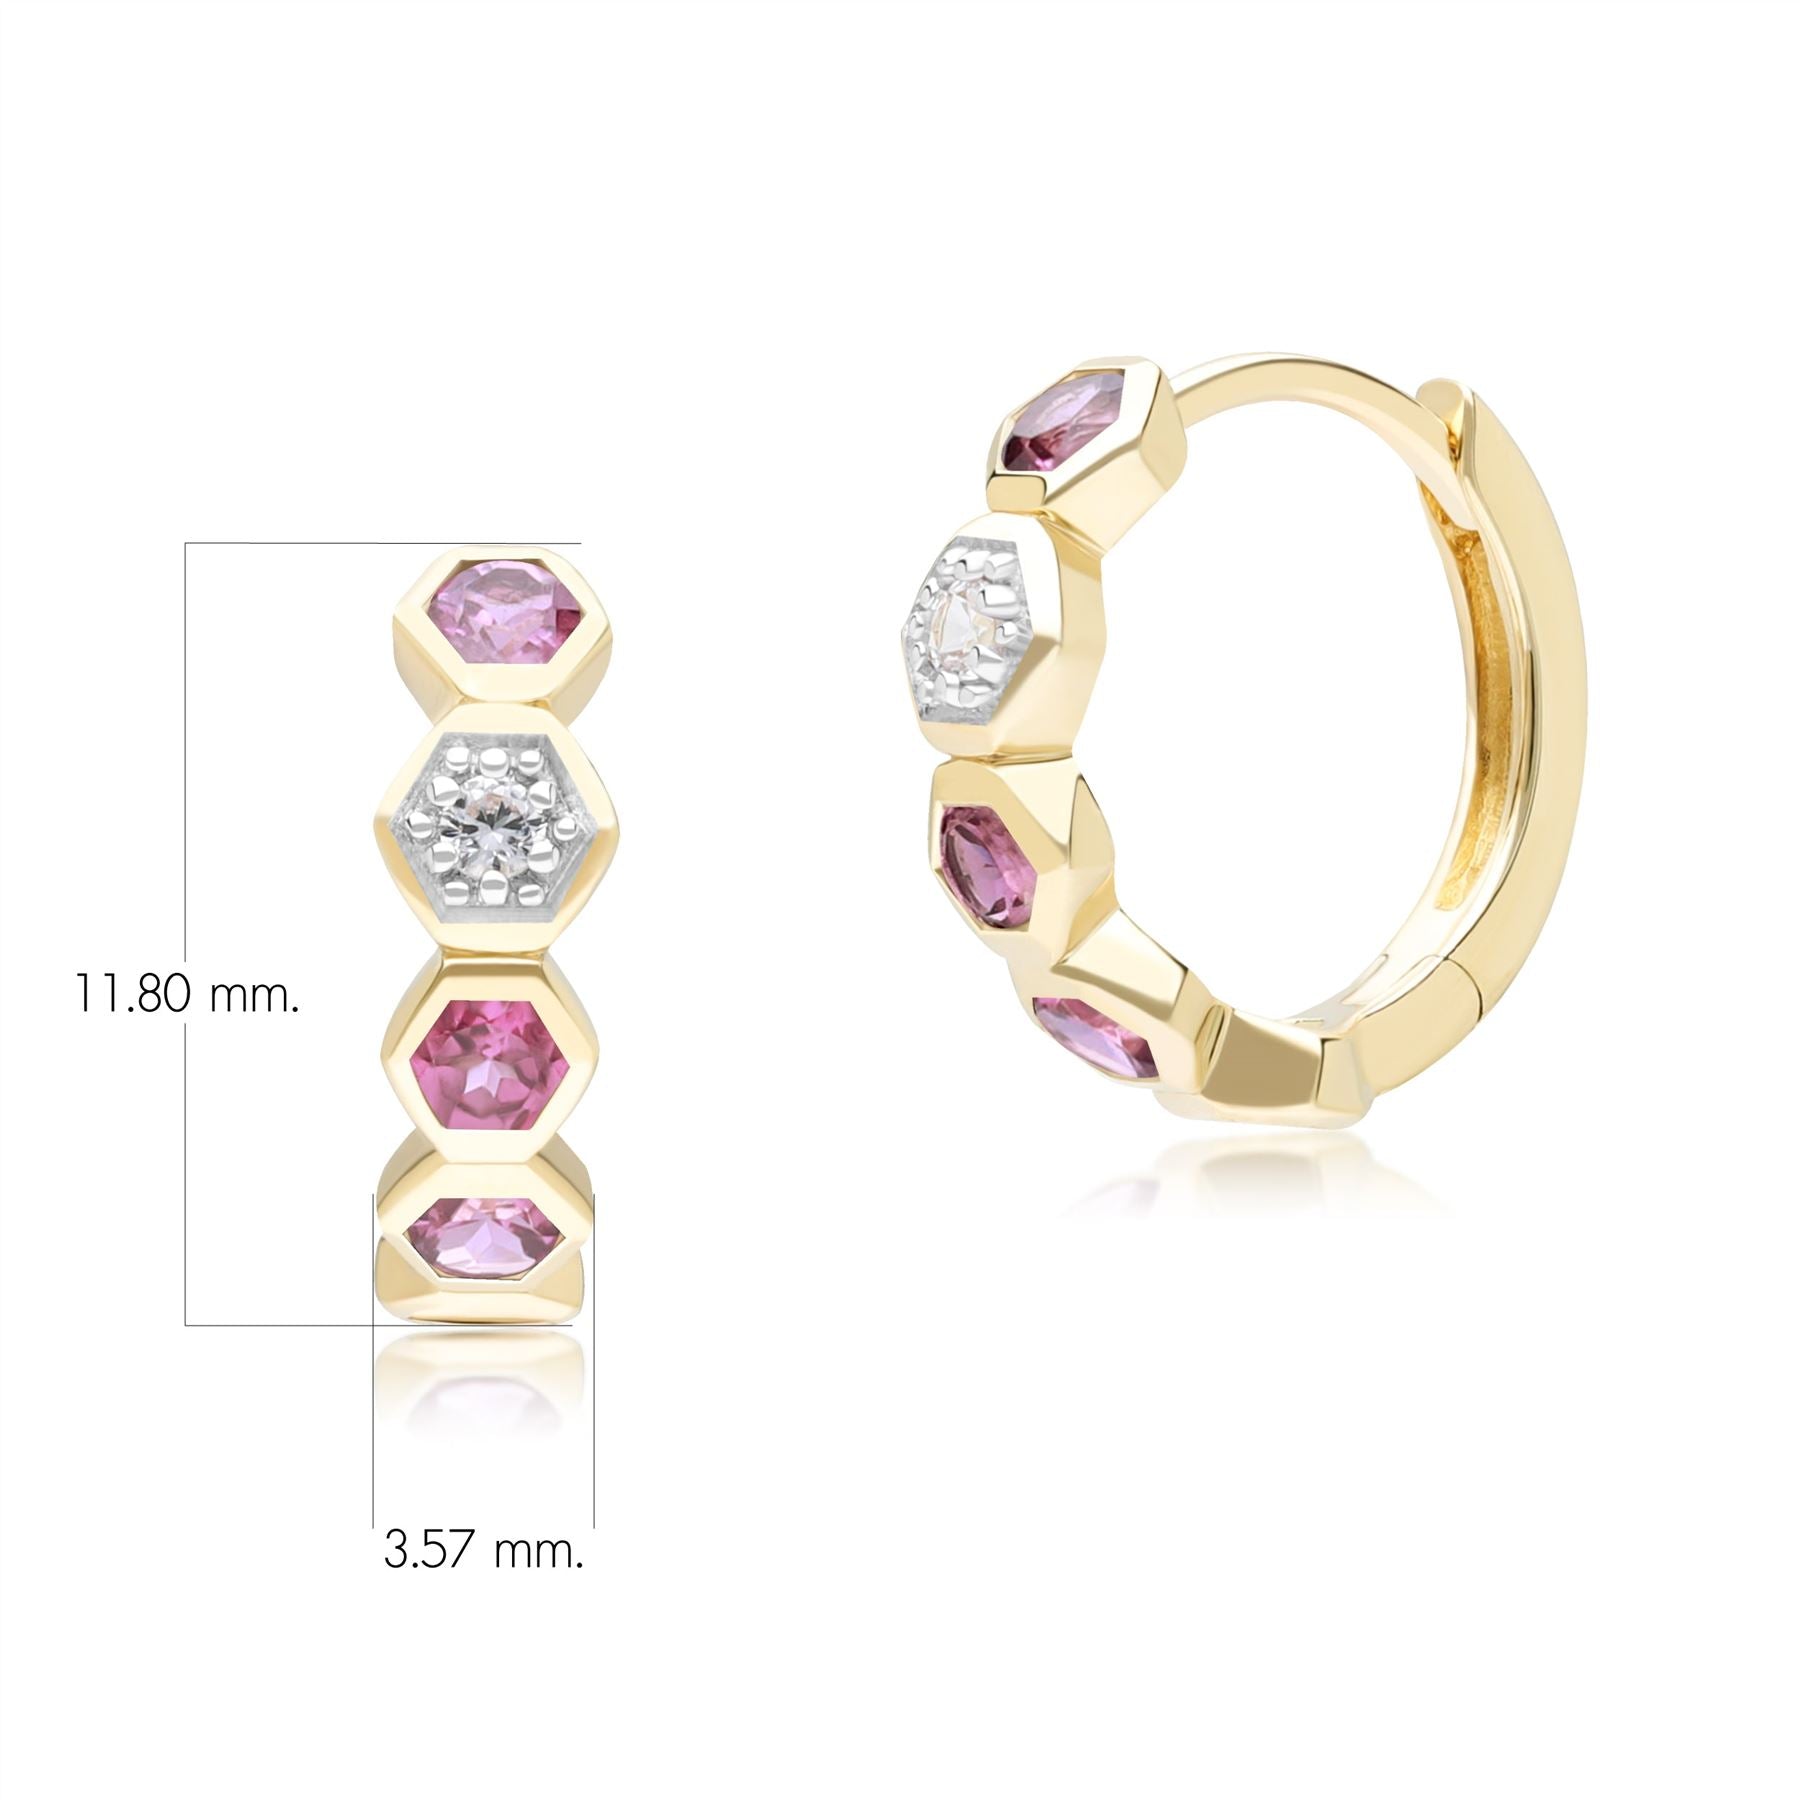 Geometric Round Rhodolite and Sapphire Hoop Earrings in 9ct Yellow Gold Dimensions 